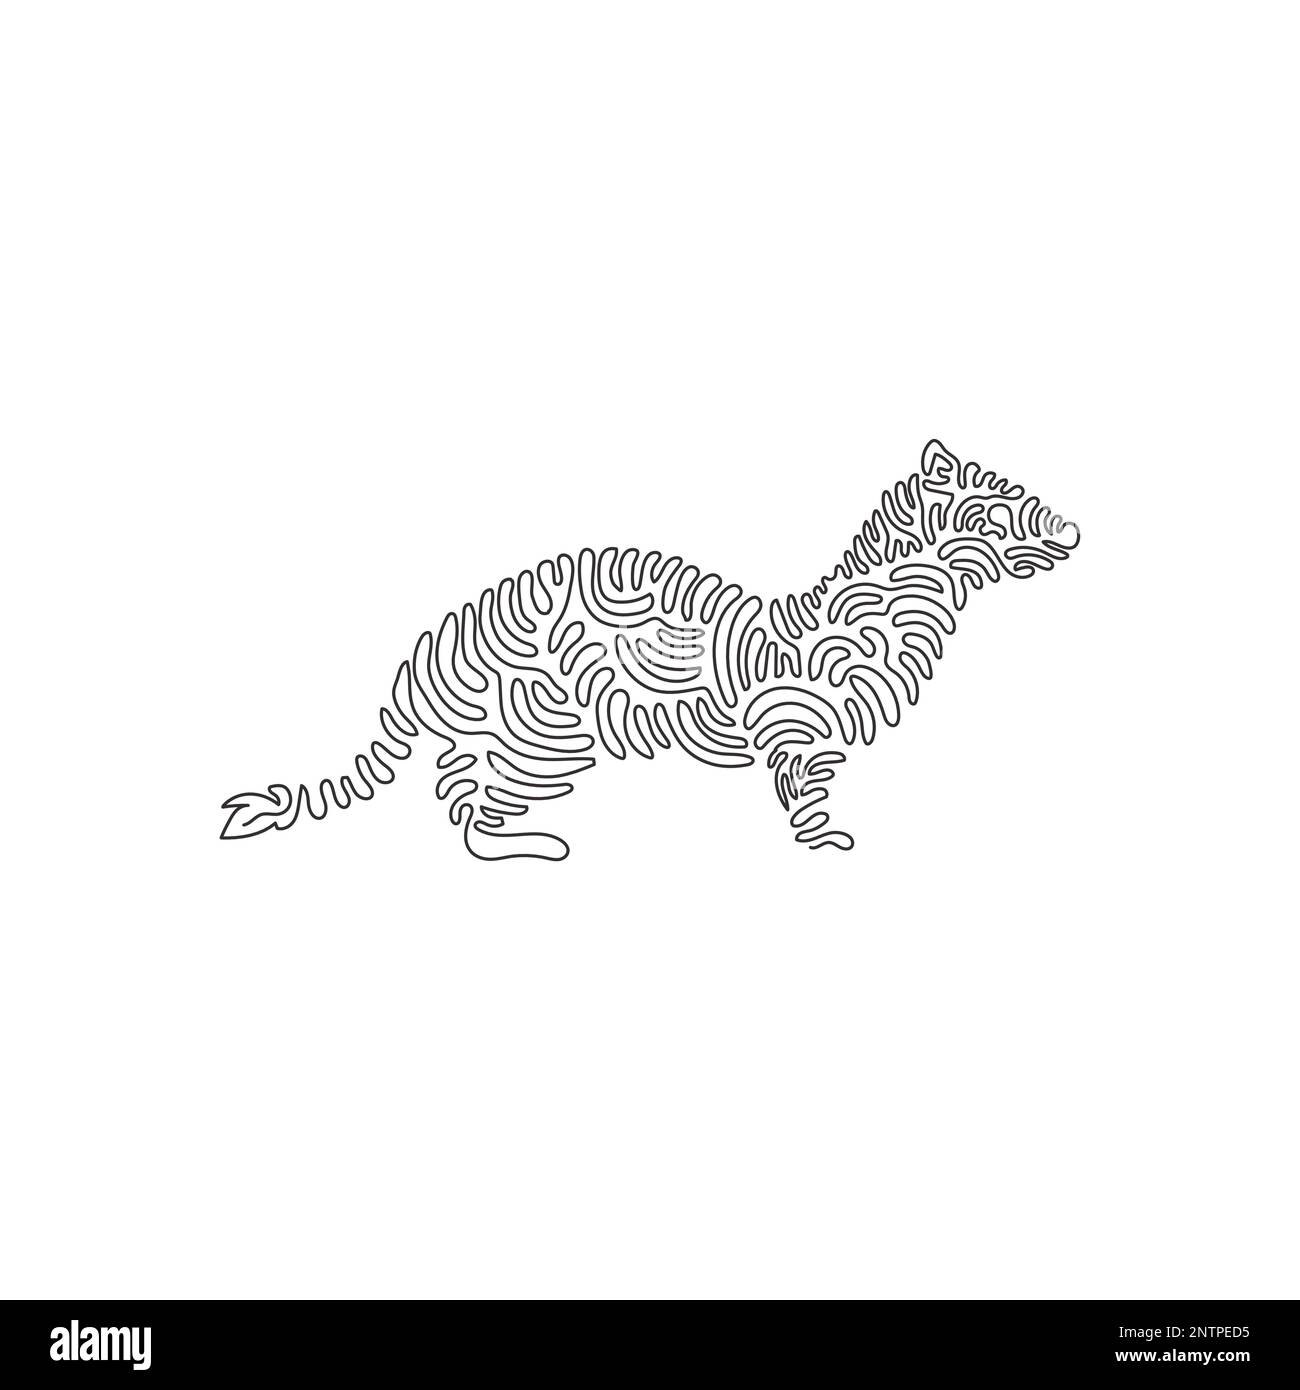 Continuous curve one line drawing of cute weasel curve abstract art. Single line editable stroke vector illustration of a weasel has a pointed snout Stock Vector